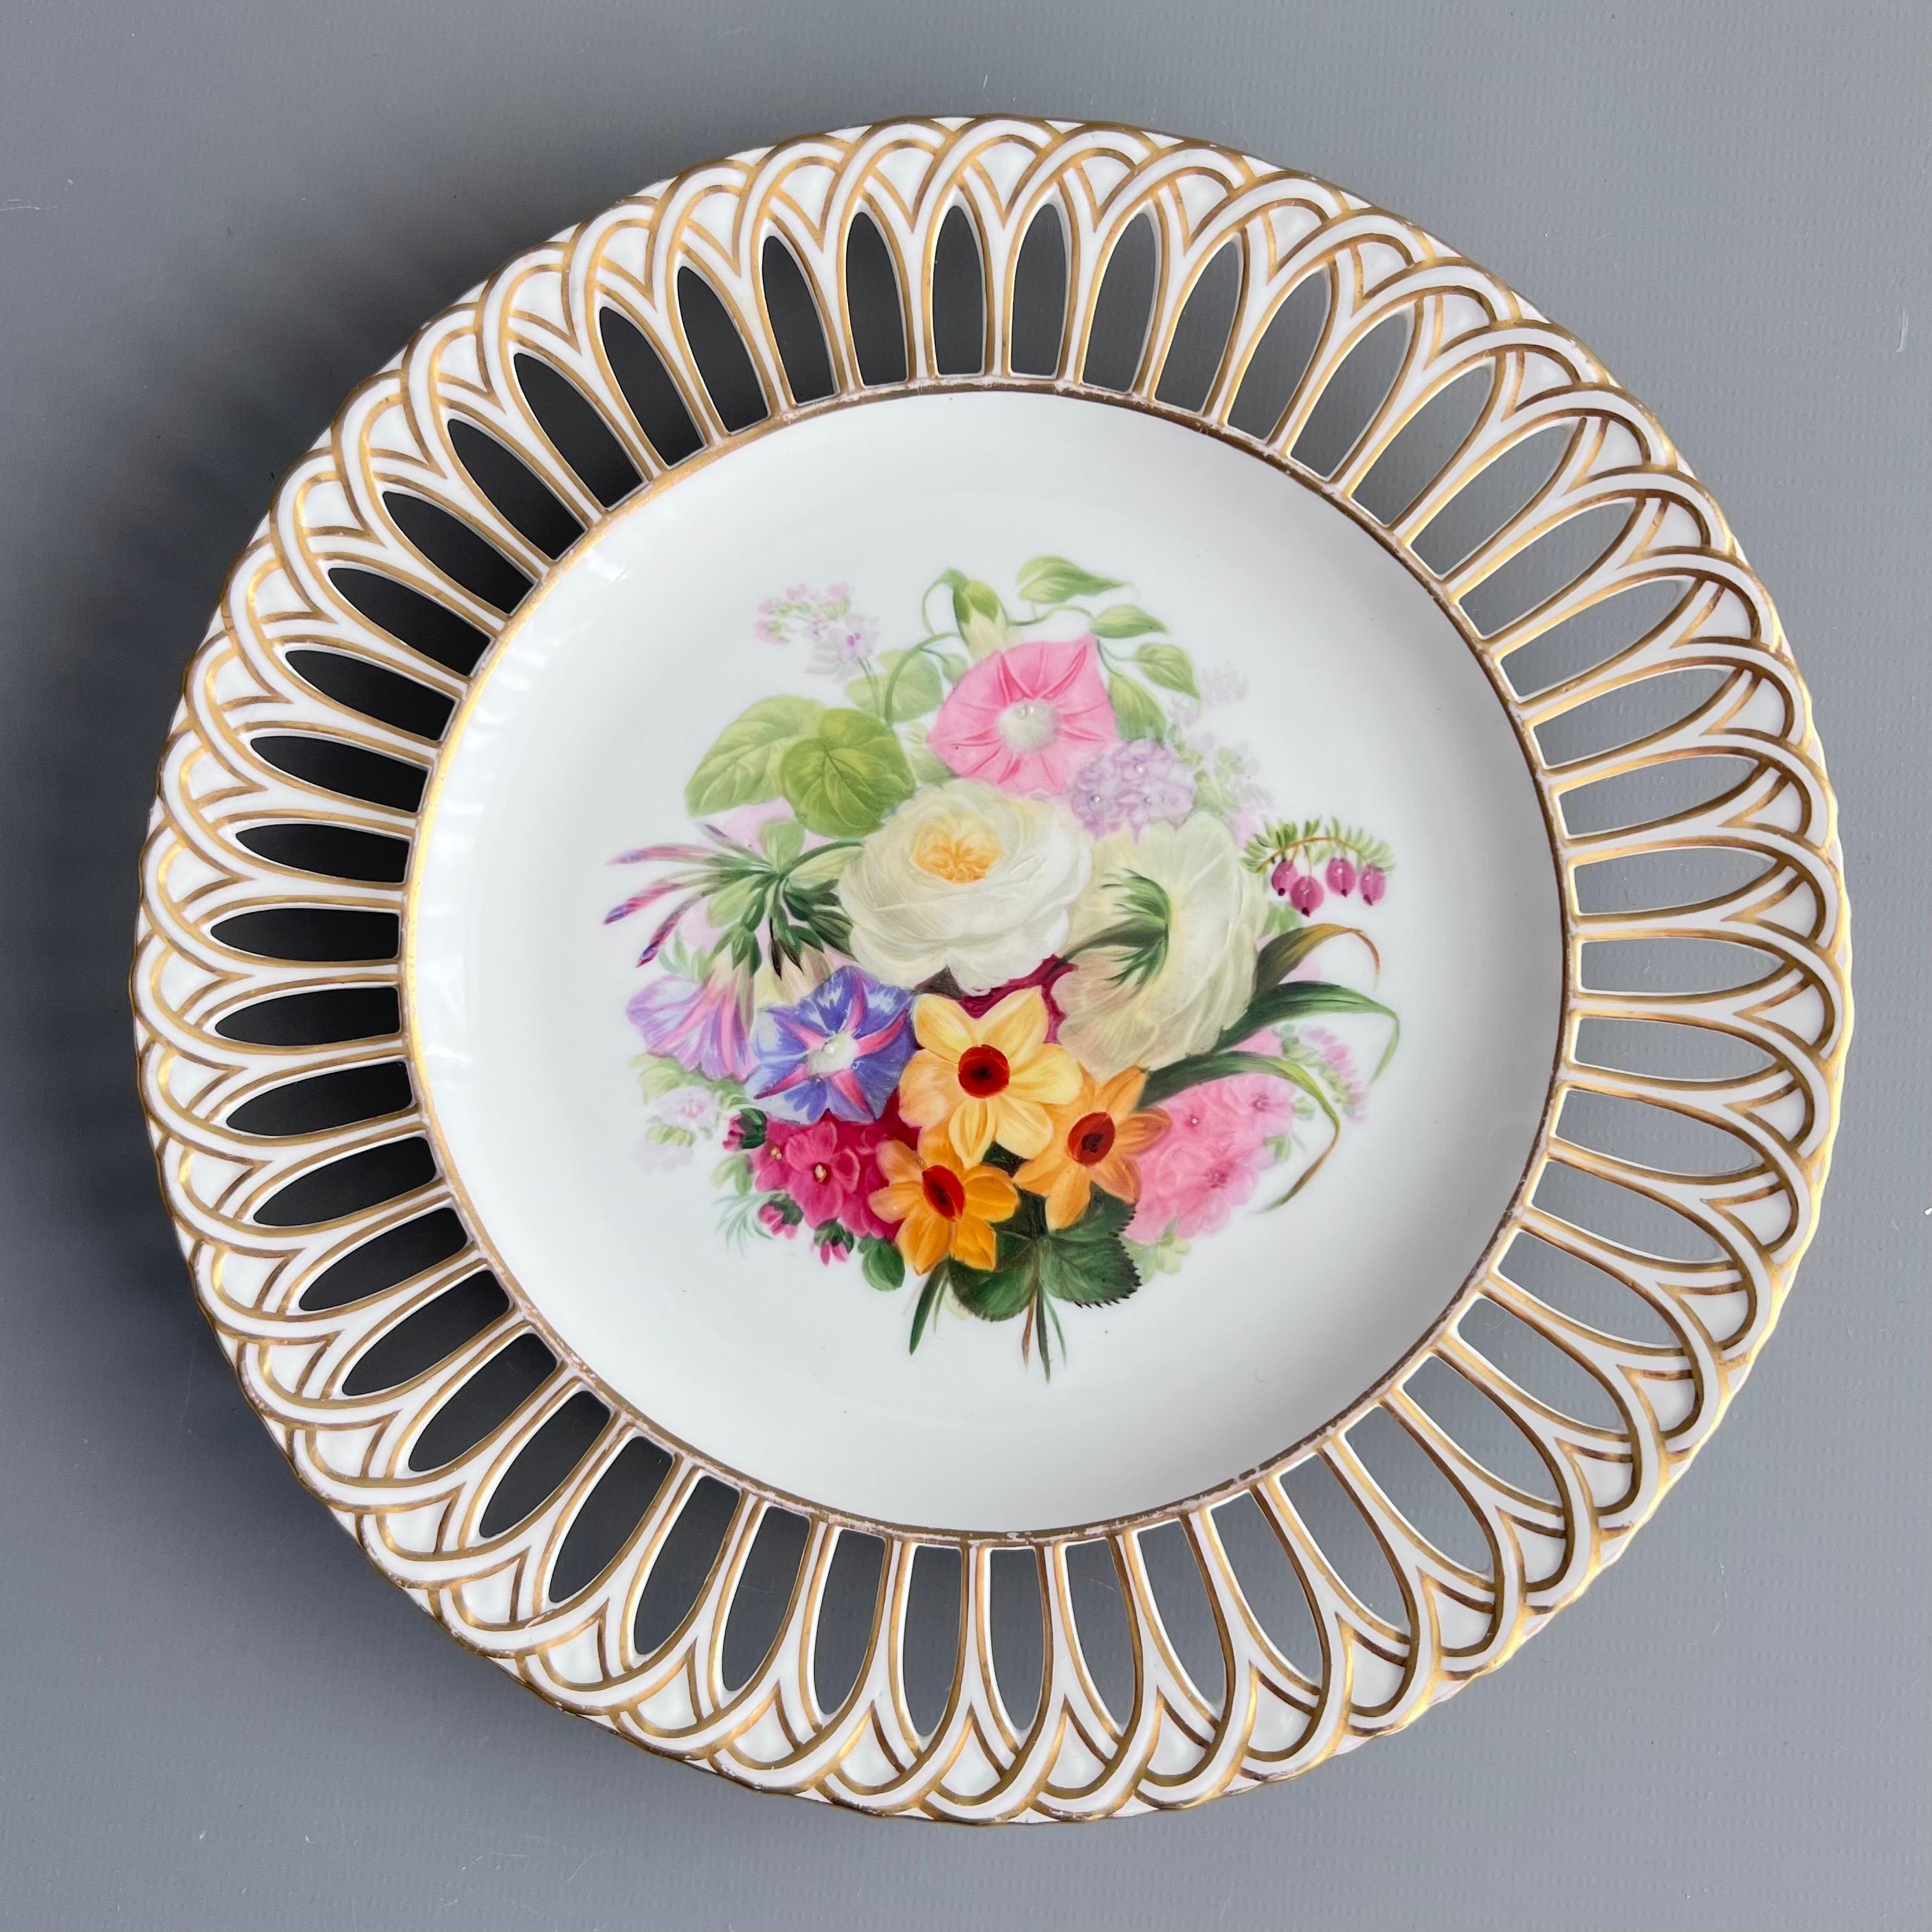 Copeland Set of 8 plates, Reticulated, Sublime Flowers by Greatbatch, 1848 For Sale 4